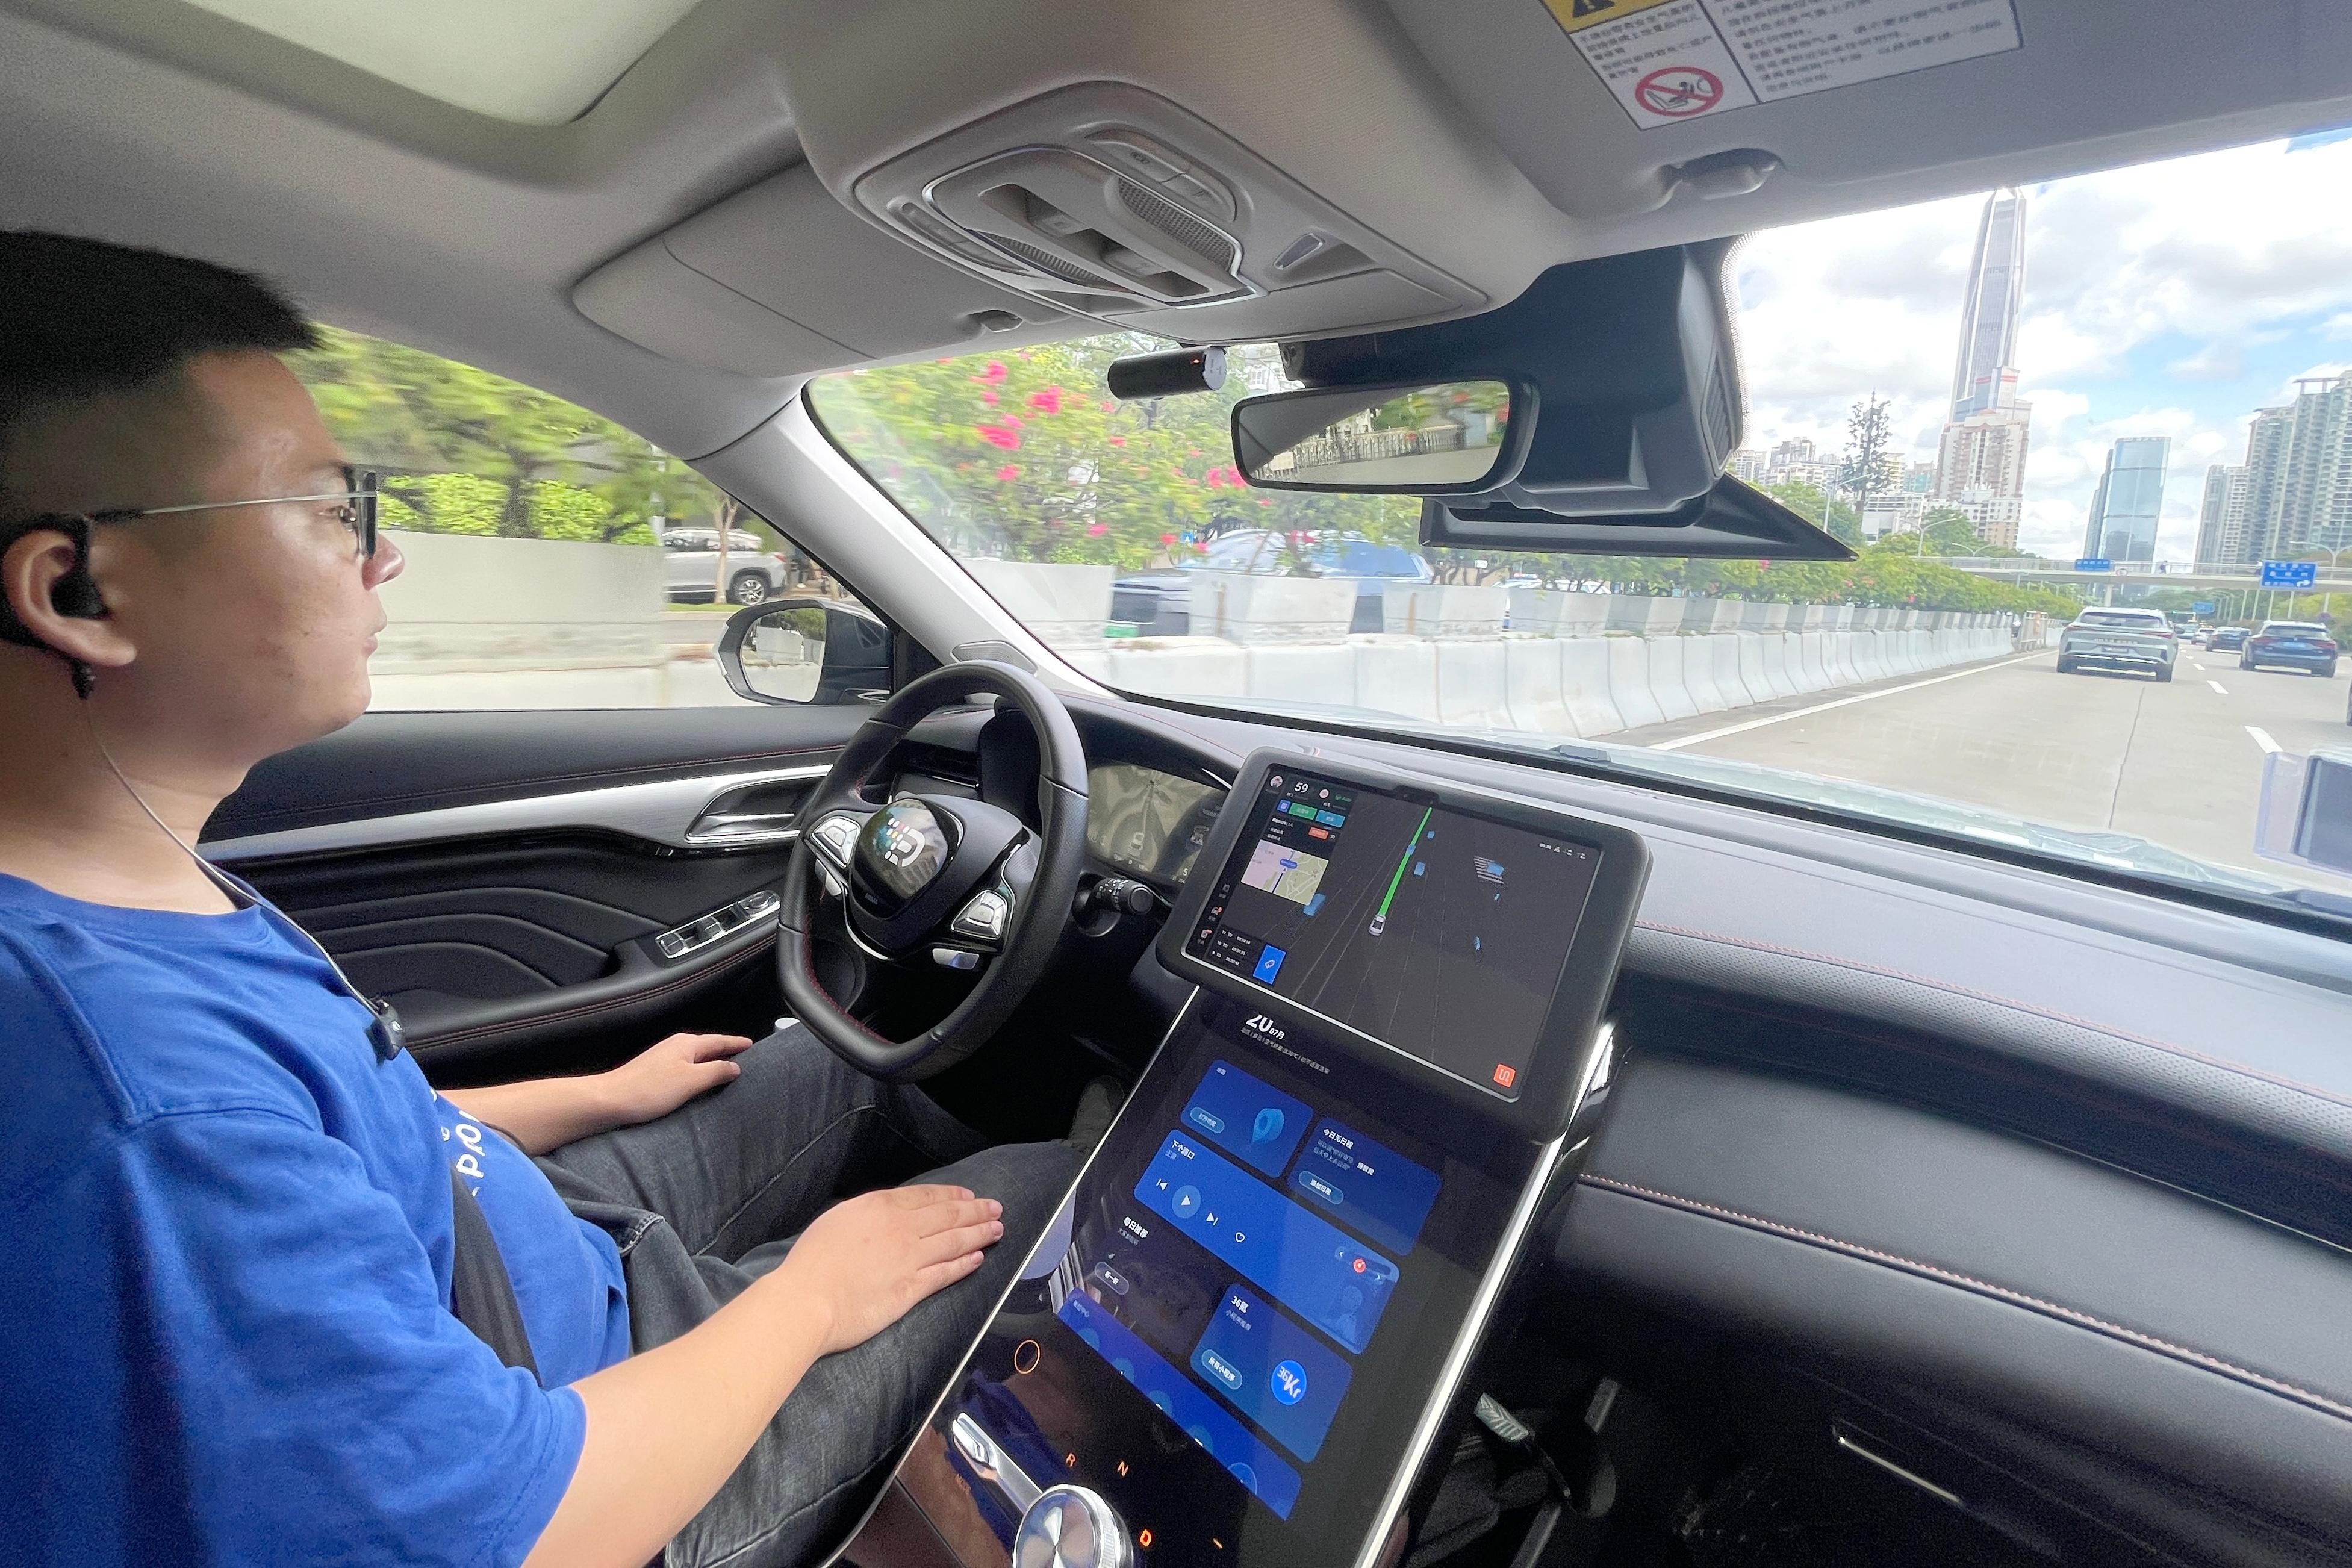 The Secretary for Transport and Logistics, Mr Lam Sai-hung, today (July 20) visited DeepRoute.ai in Shenzhen. Photo shows an autonomous vehicle of DeepRoute.ai travelling at a speed of about 60 kilometres per hour on a highway in Futian, under the supervision of a safety operator.